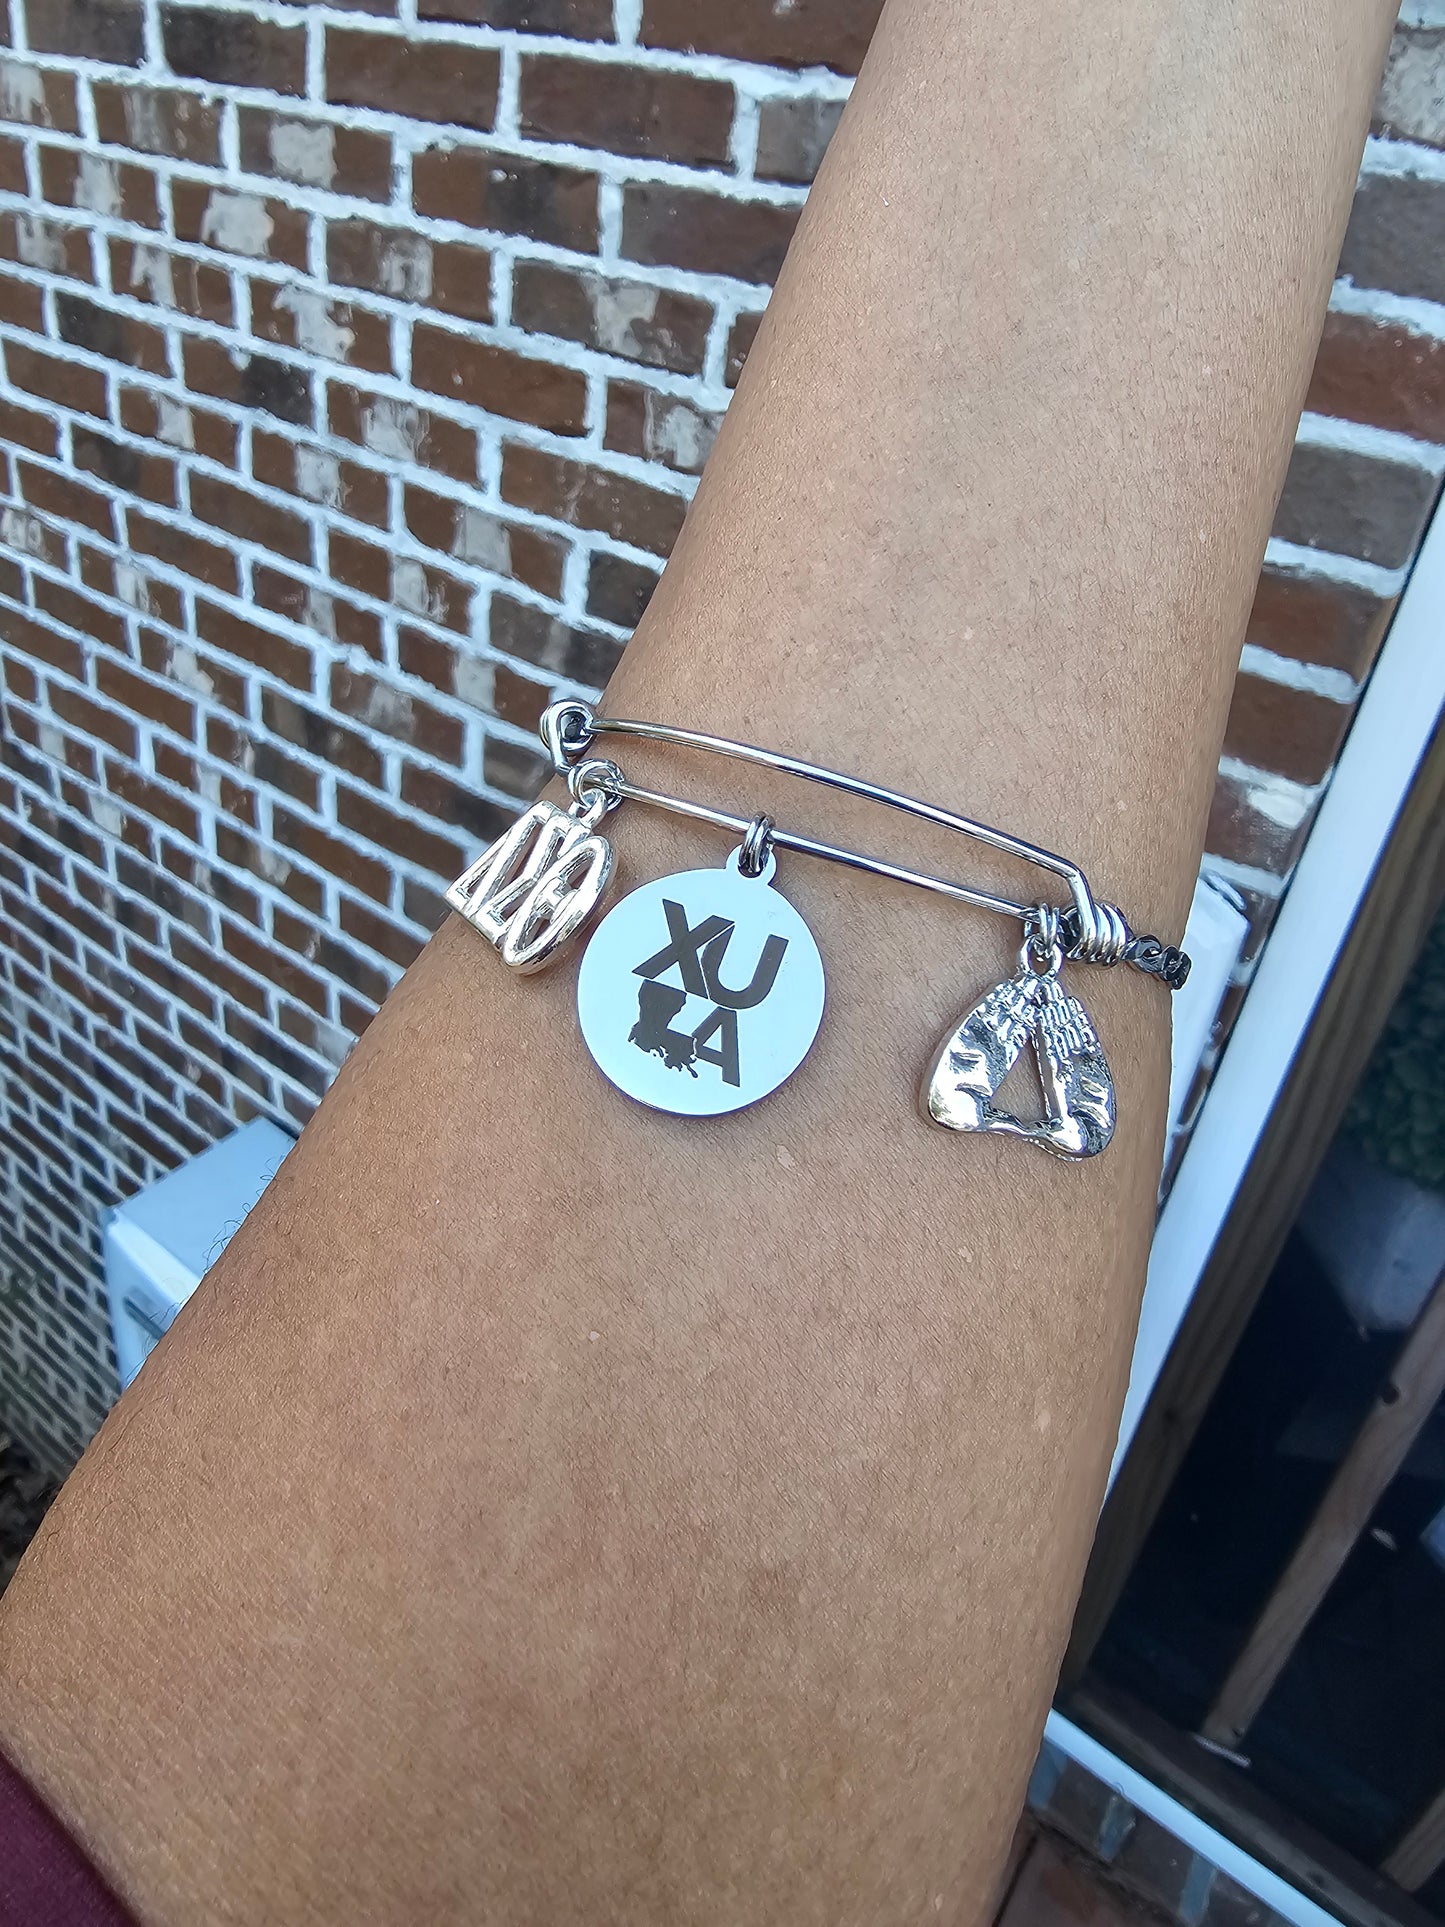 Xavier University of Louisiana Bracelet Available In Gold and Silver